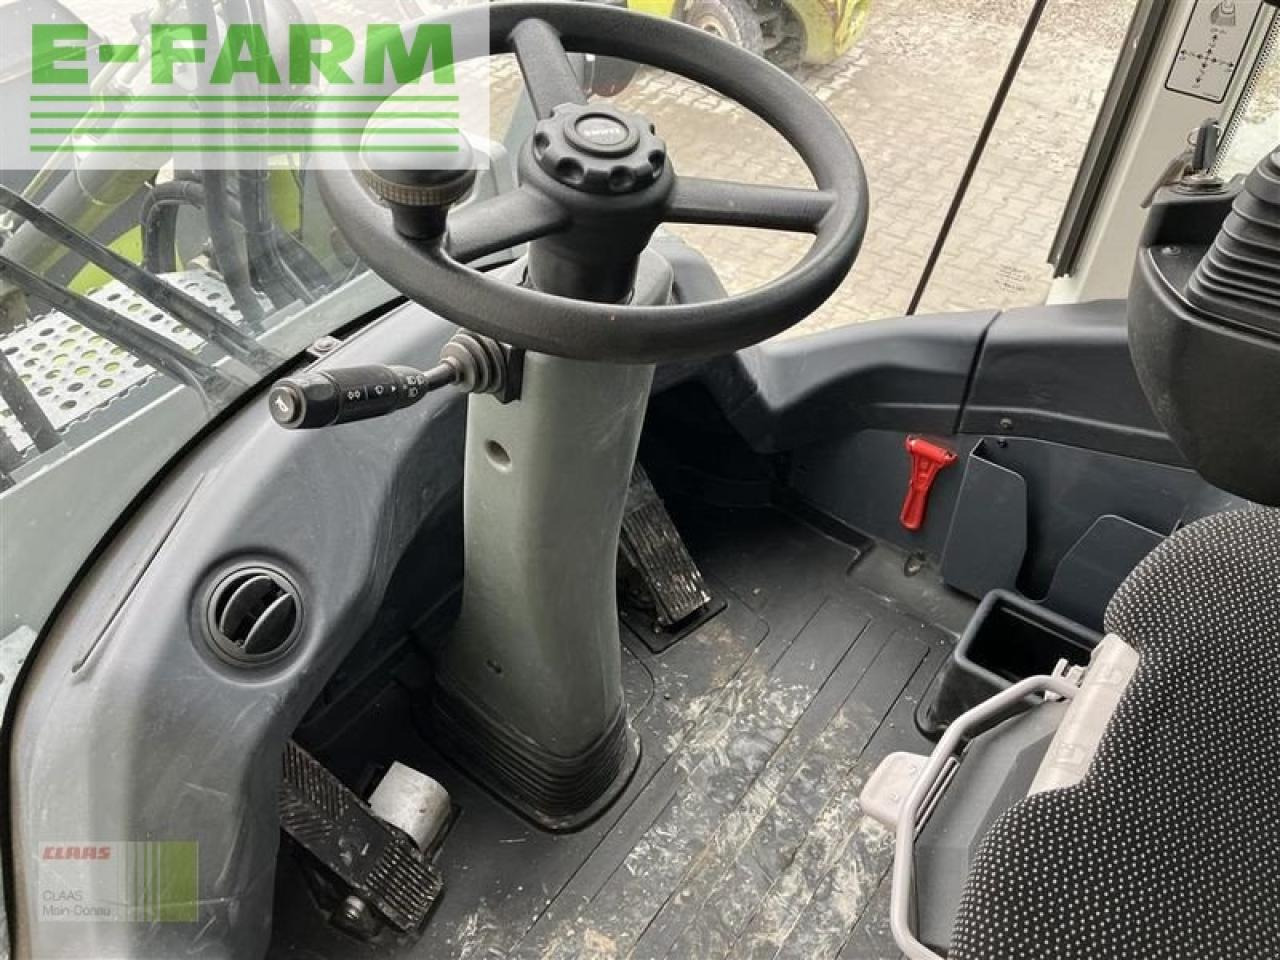 Tracteur agricole CLAAS torion 1511